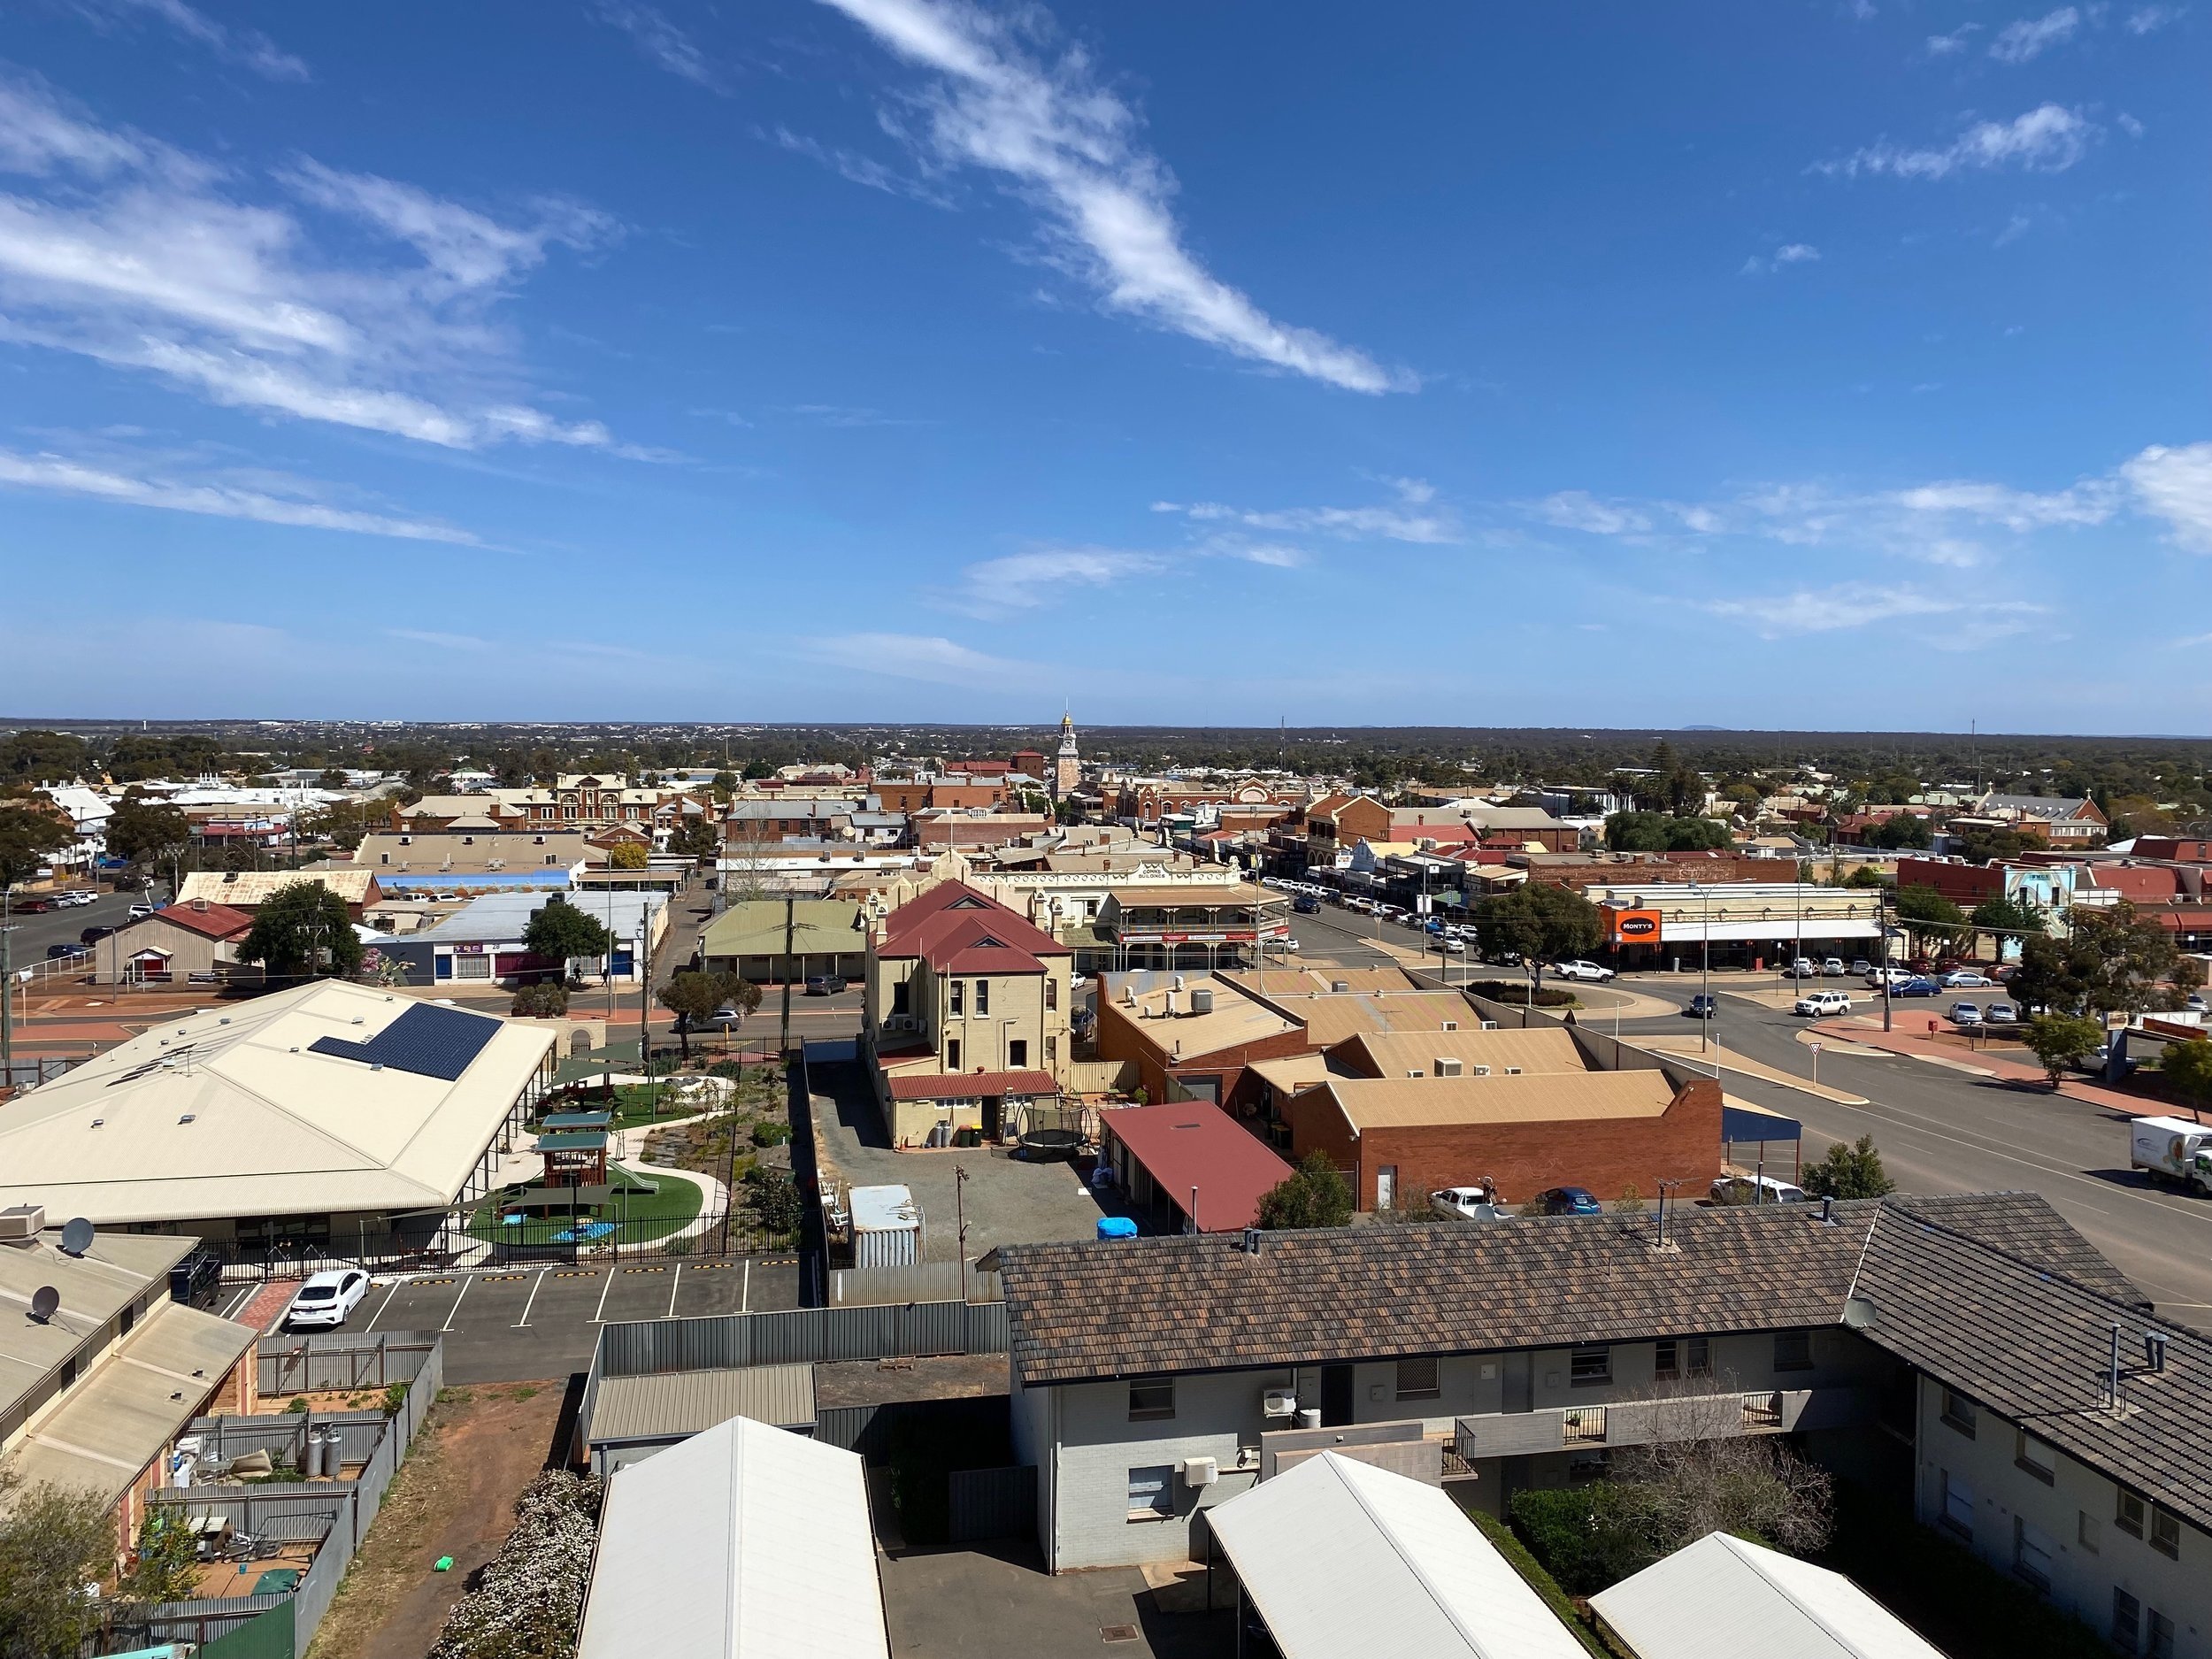 Kalgoorlie from the Museum of the Goldfields look-out (Alex Sherlock, 2022)